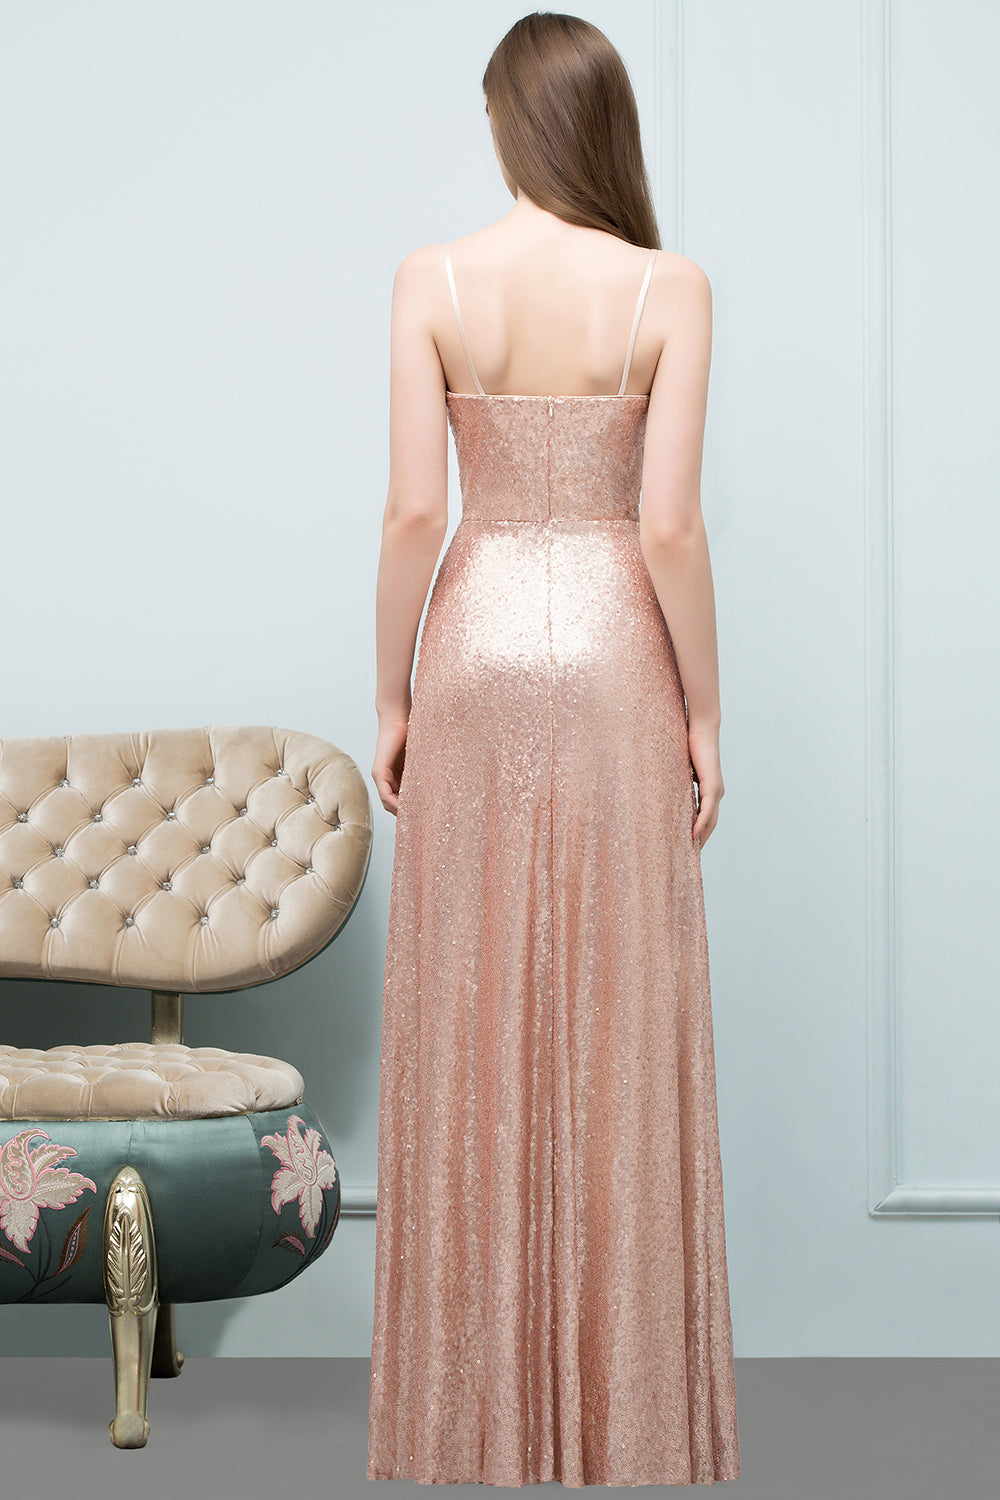 Load image into Gallery viewer, A-line Sequined V-Neck Spaghetti Straps Long Bridesmaid Dress-BIZTUNNEL
